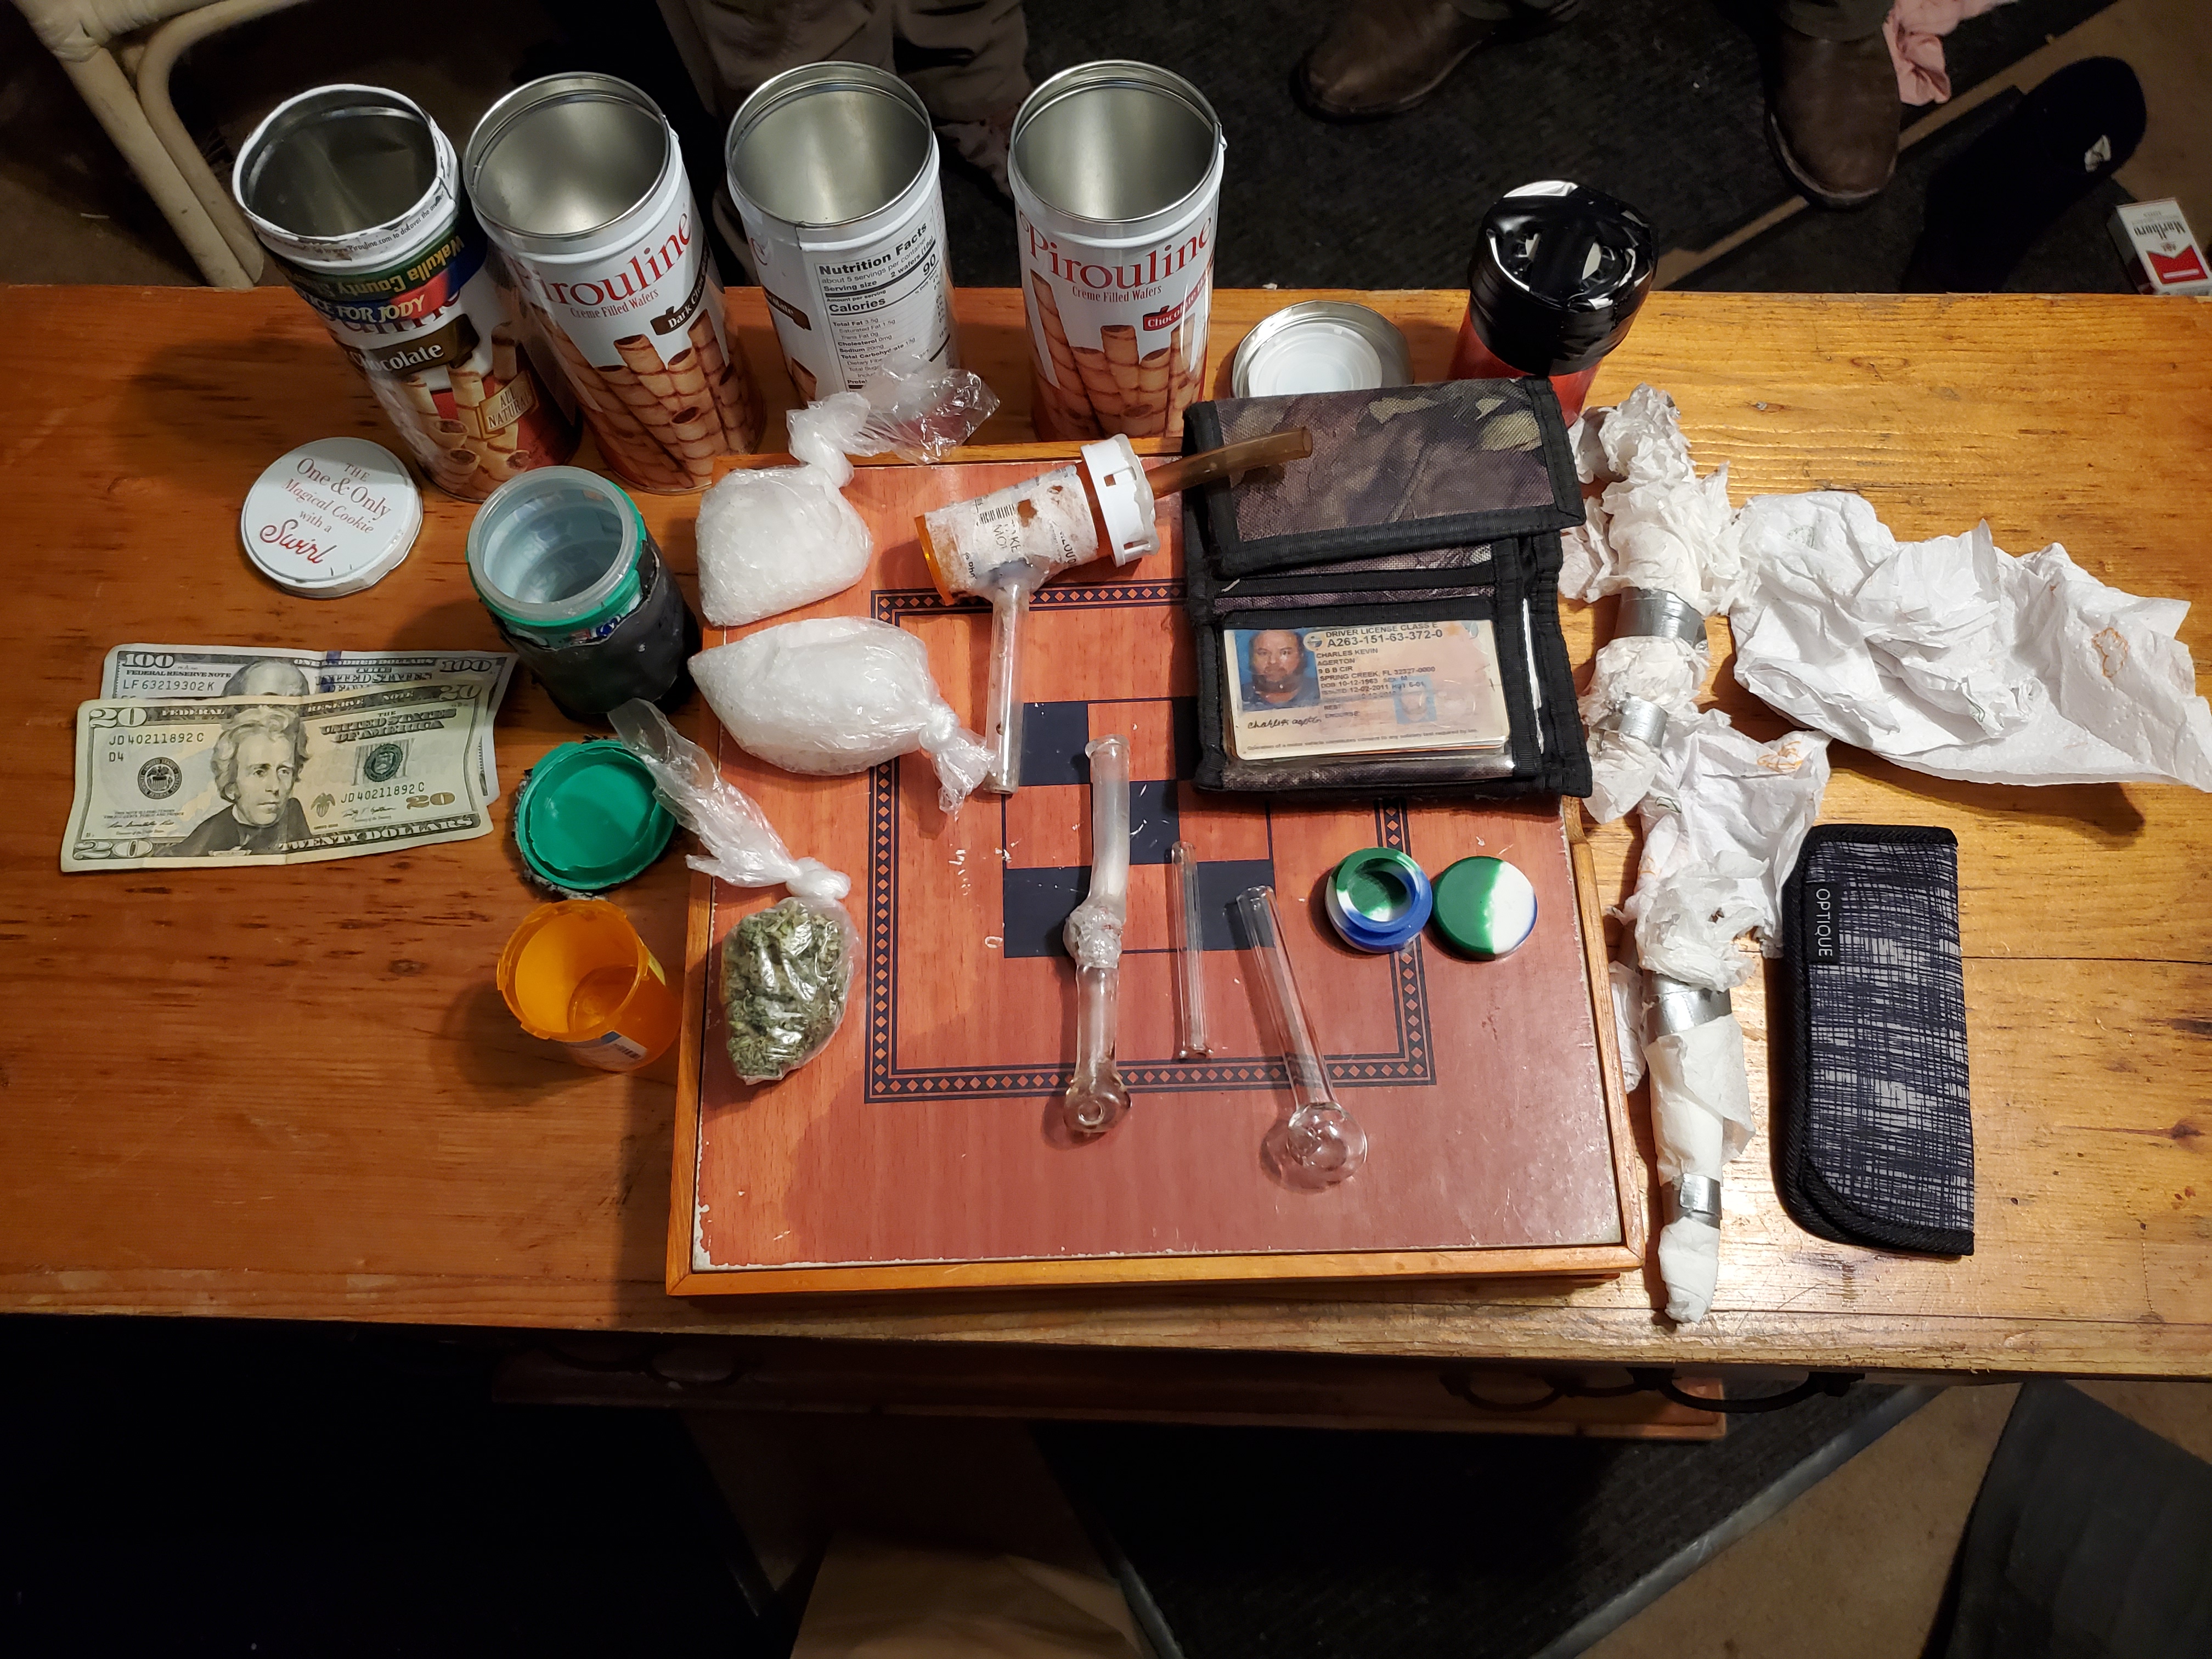 Wcso Makes Drug Bust During Search Warrant Wakulla County Sheriff S